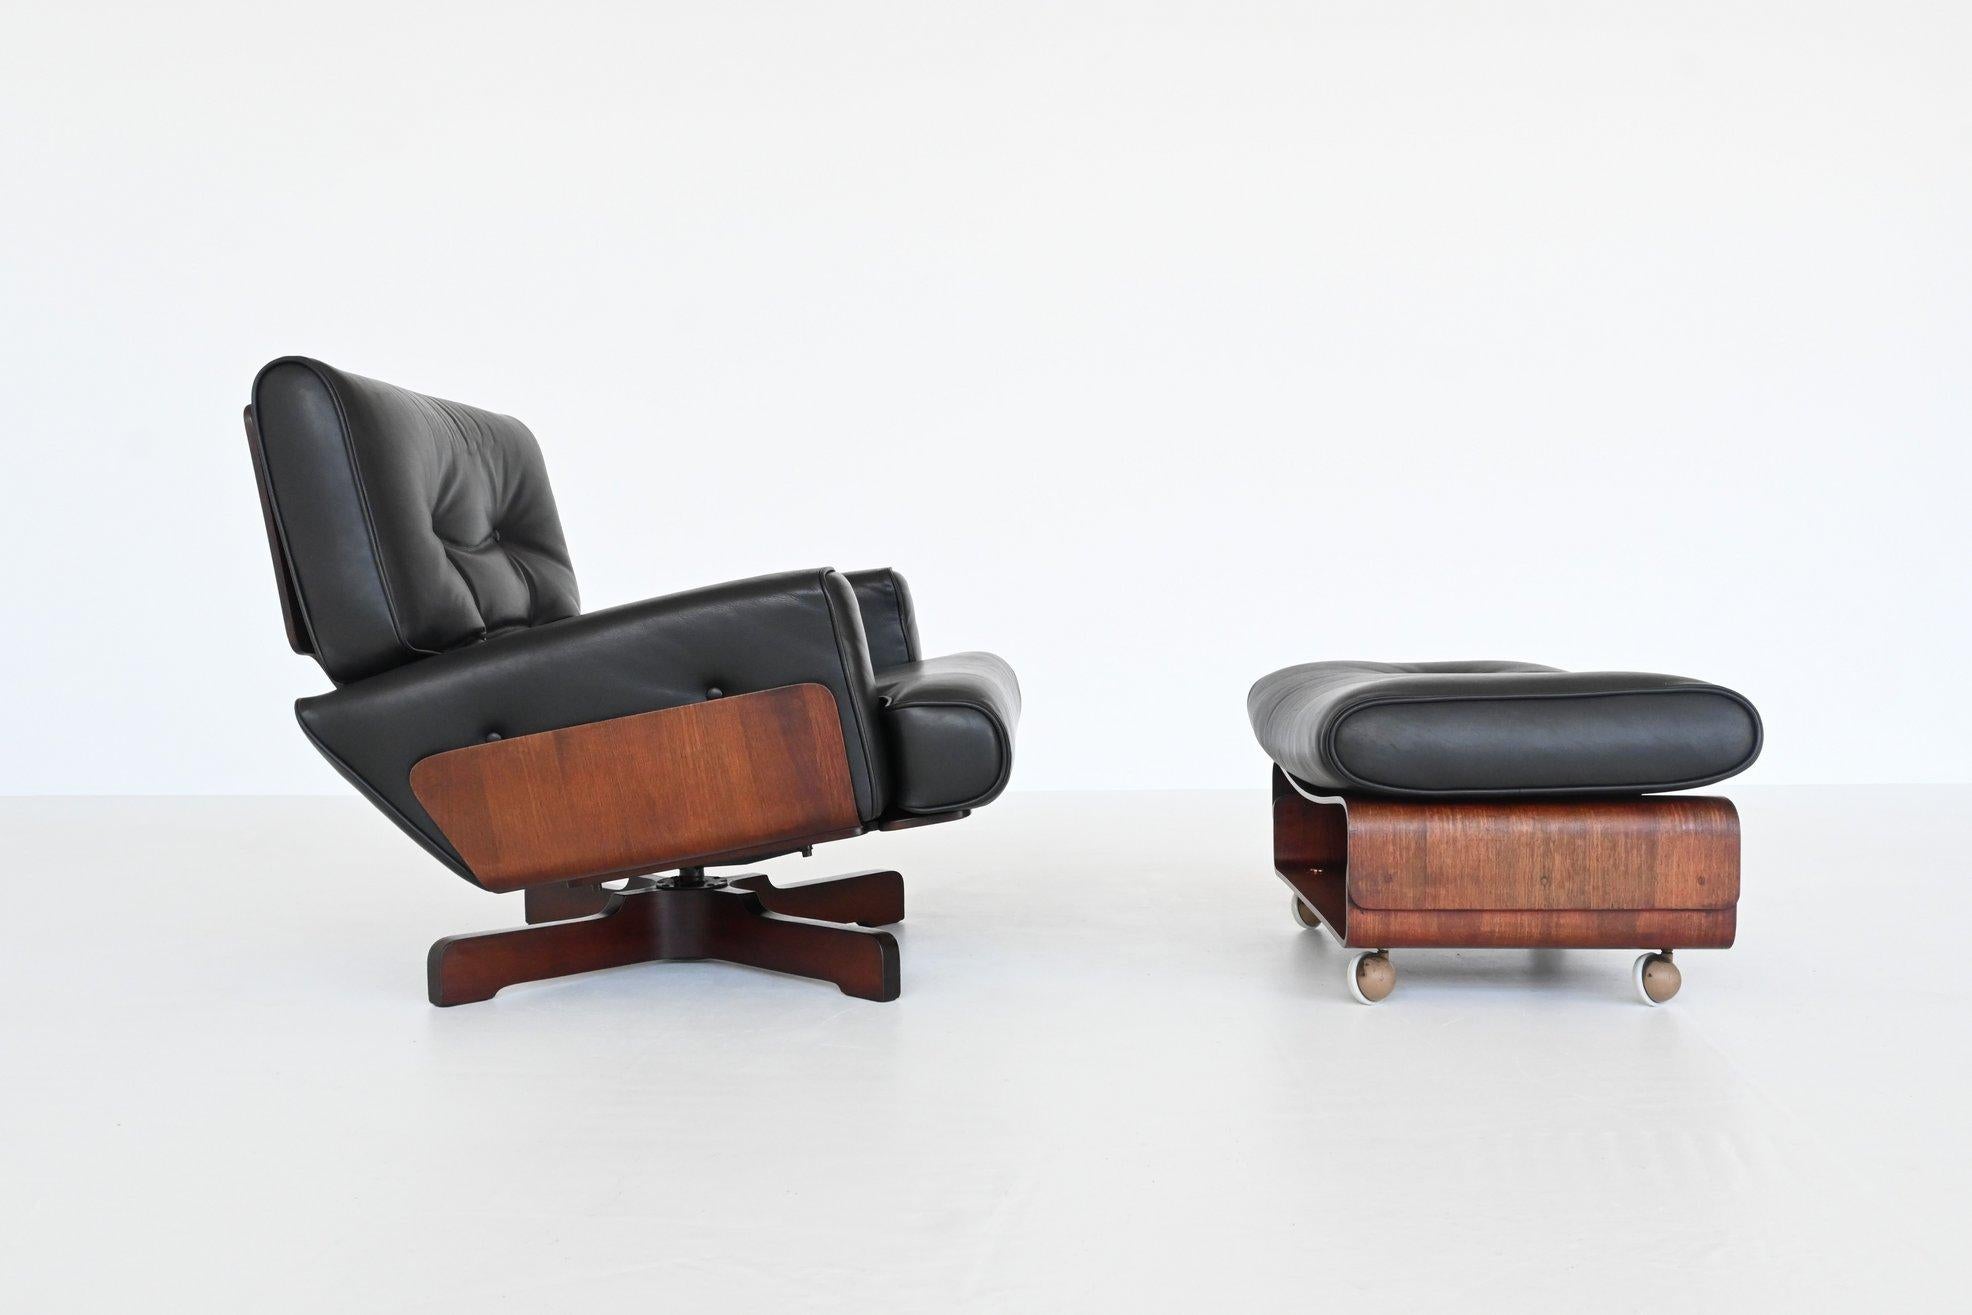 Stunning lounge chair and matching ottoman model 401 designed by Menilio Taro for Cinova, Italy 1964. This fantastic shaped lounge chair set is made of rosewood plywood and has high quality black leather tufted cushions. The base of the chair is